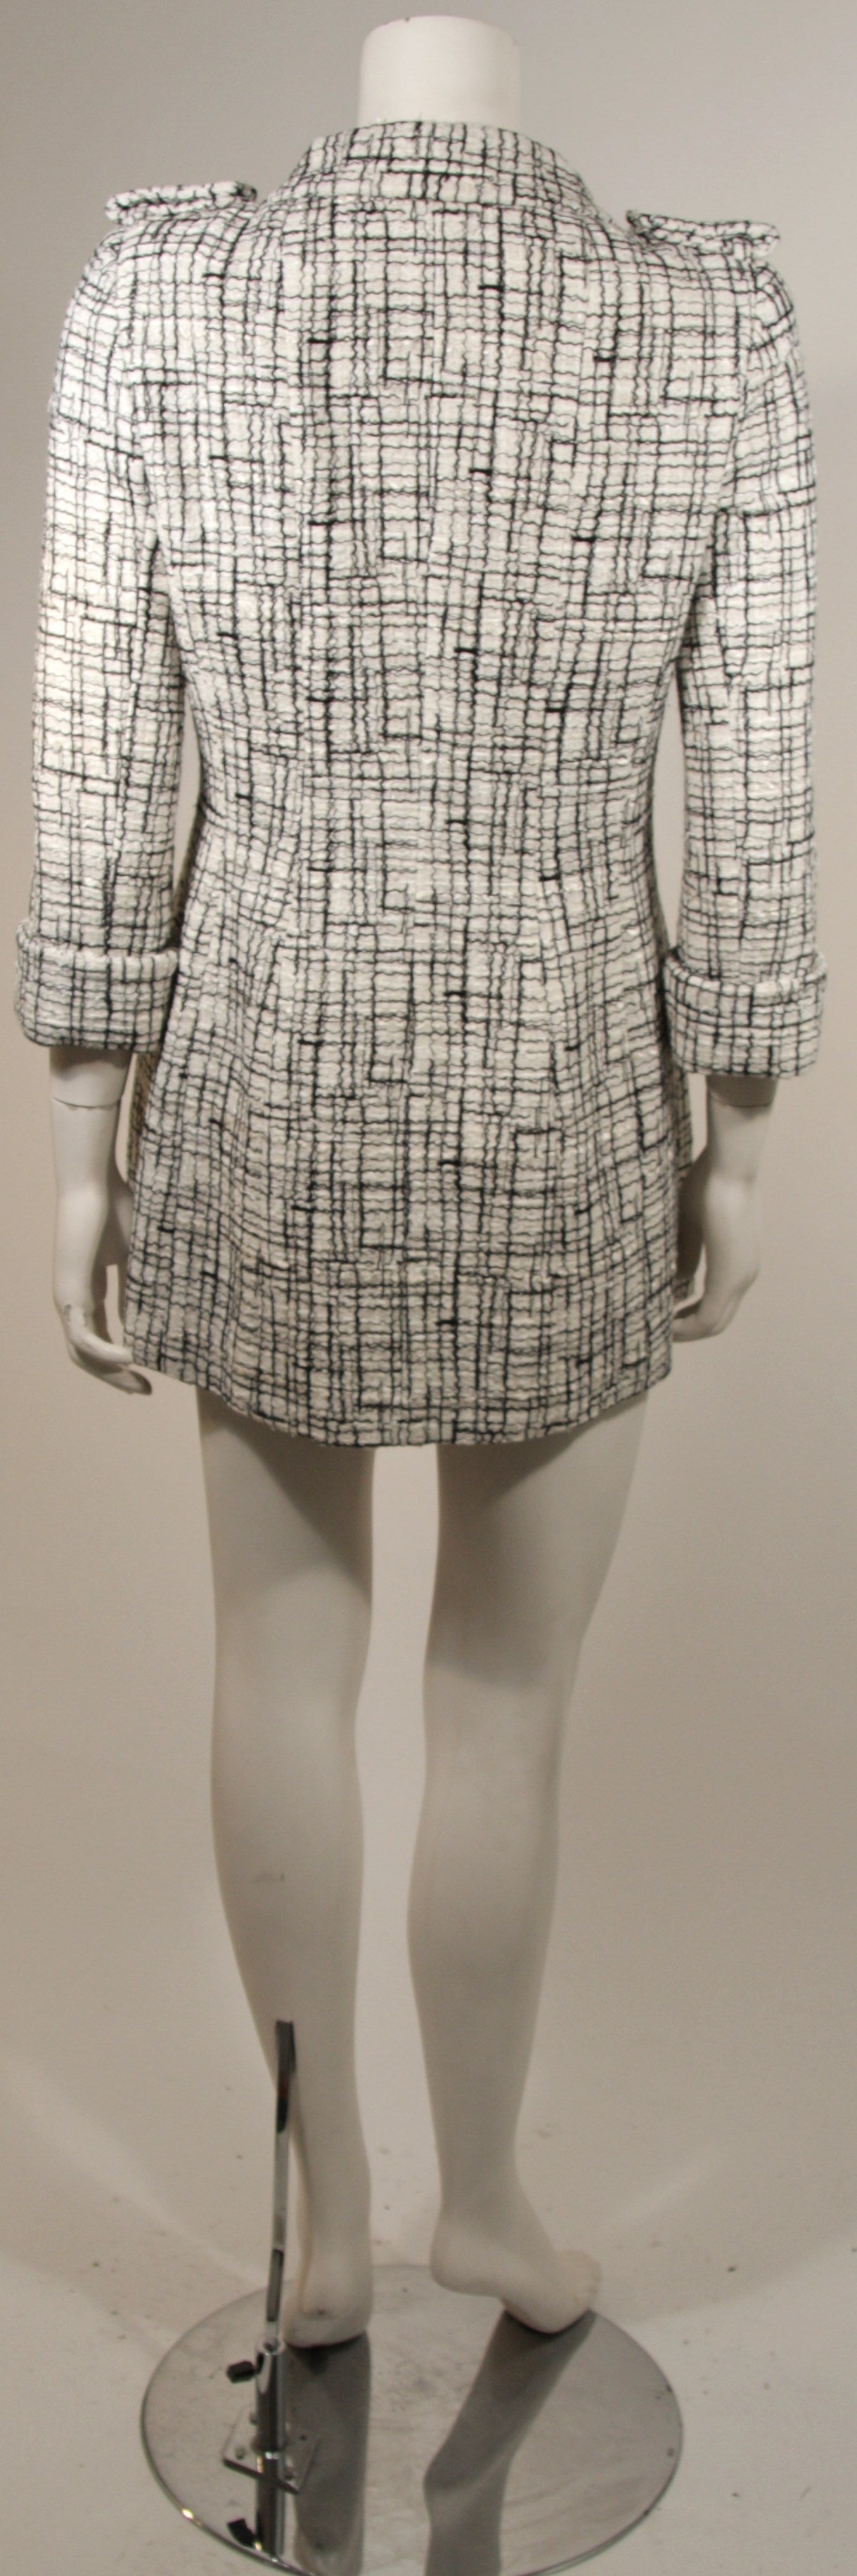 Chanel 2006 Cruise Collection White and Black Tweed Military Style Coat Size 40 3